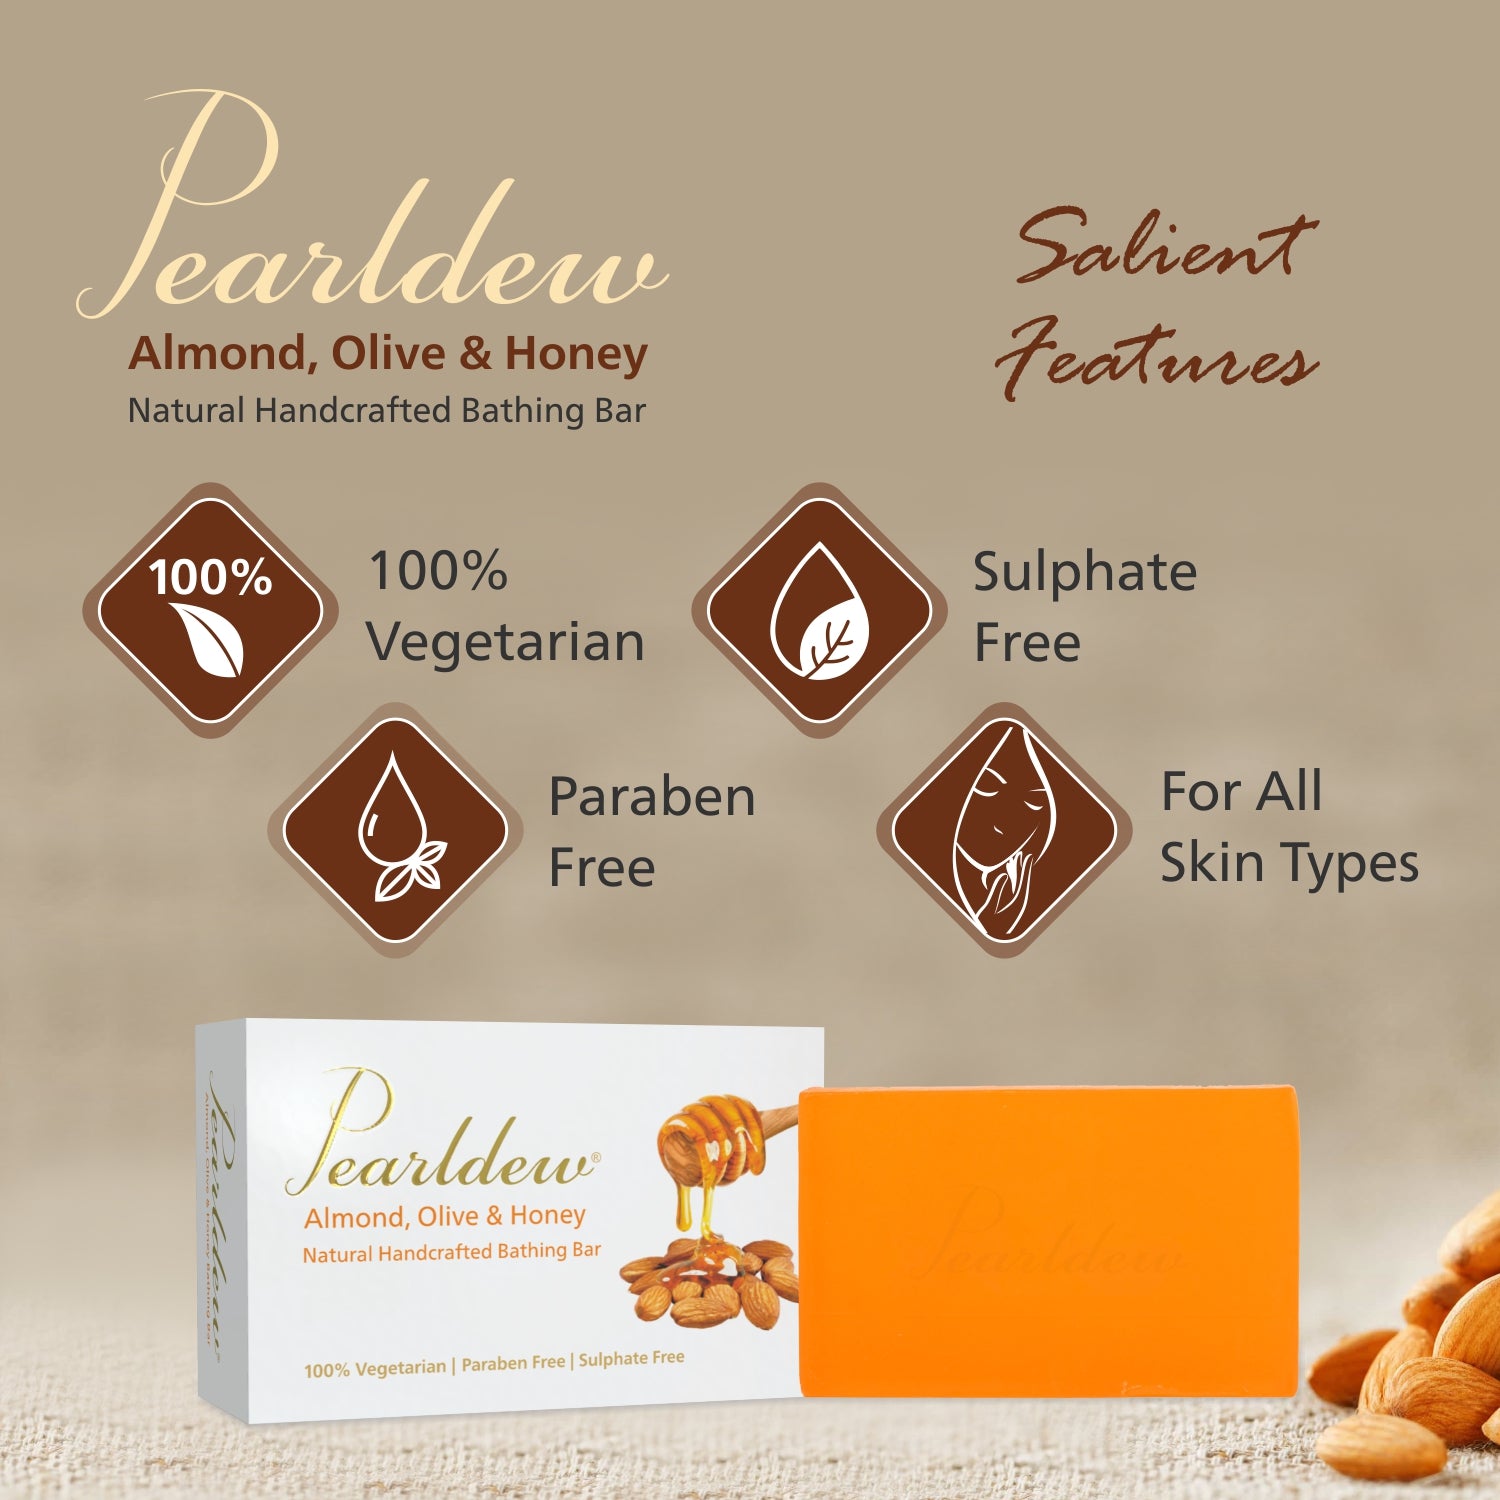 Pearldew Almond, Olive & Honey Natural Handcrafted Bathing Bar (100 gm)